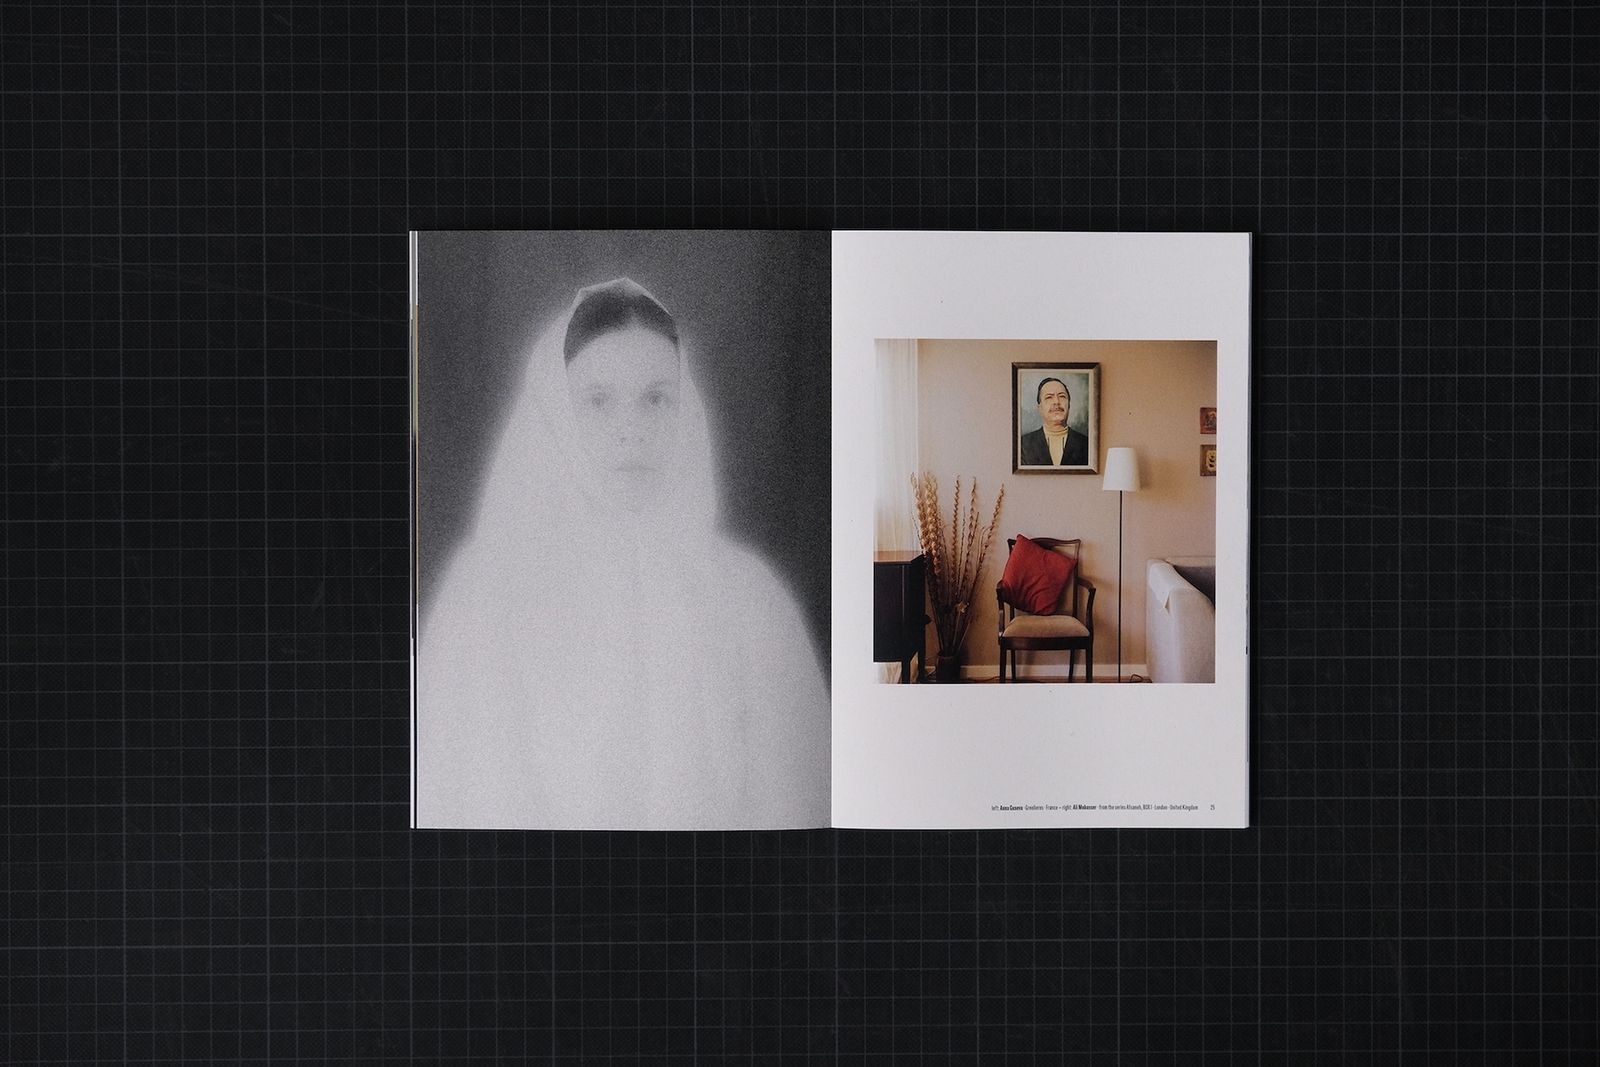 Issue 16 – Common Love by Shirin Neshat, spread with images by Anna Guseva and Ali Mobasser